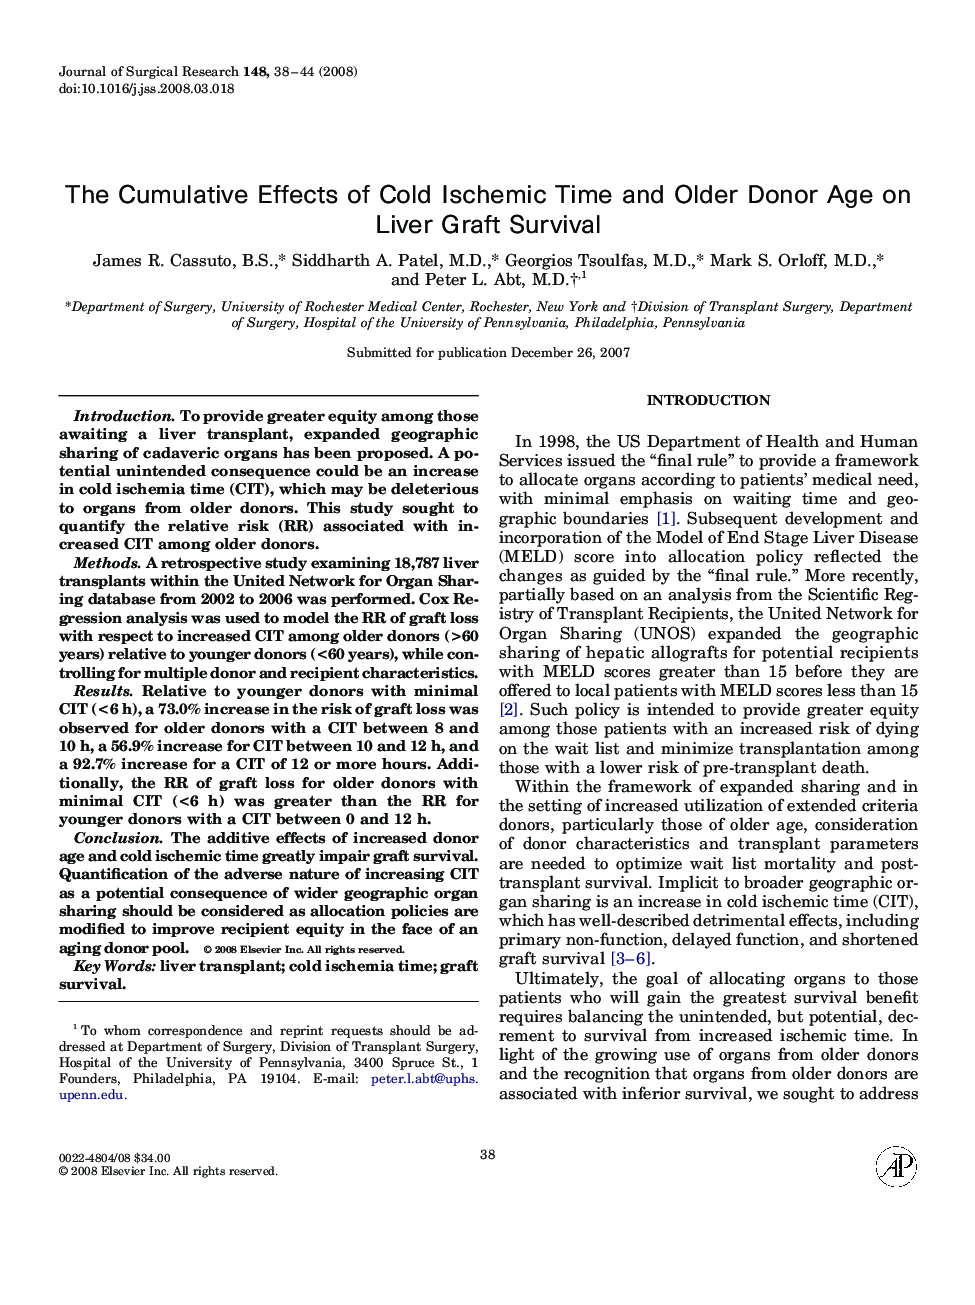 The Cumulative Effects of Cold Ischemic Time and Older Donor Age on Liver Graft Survival